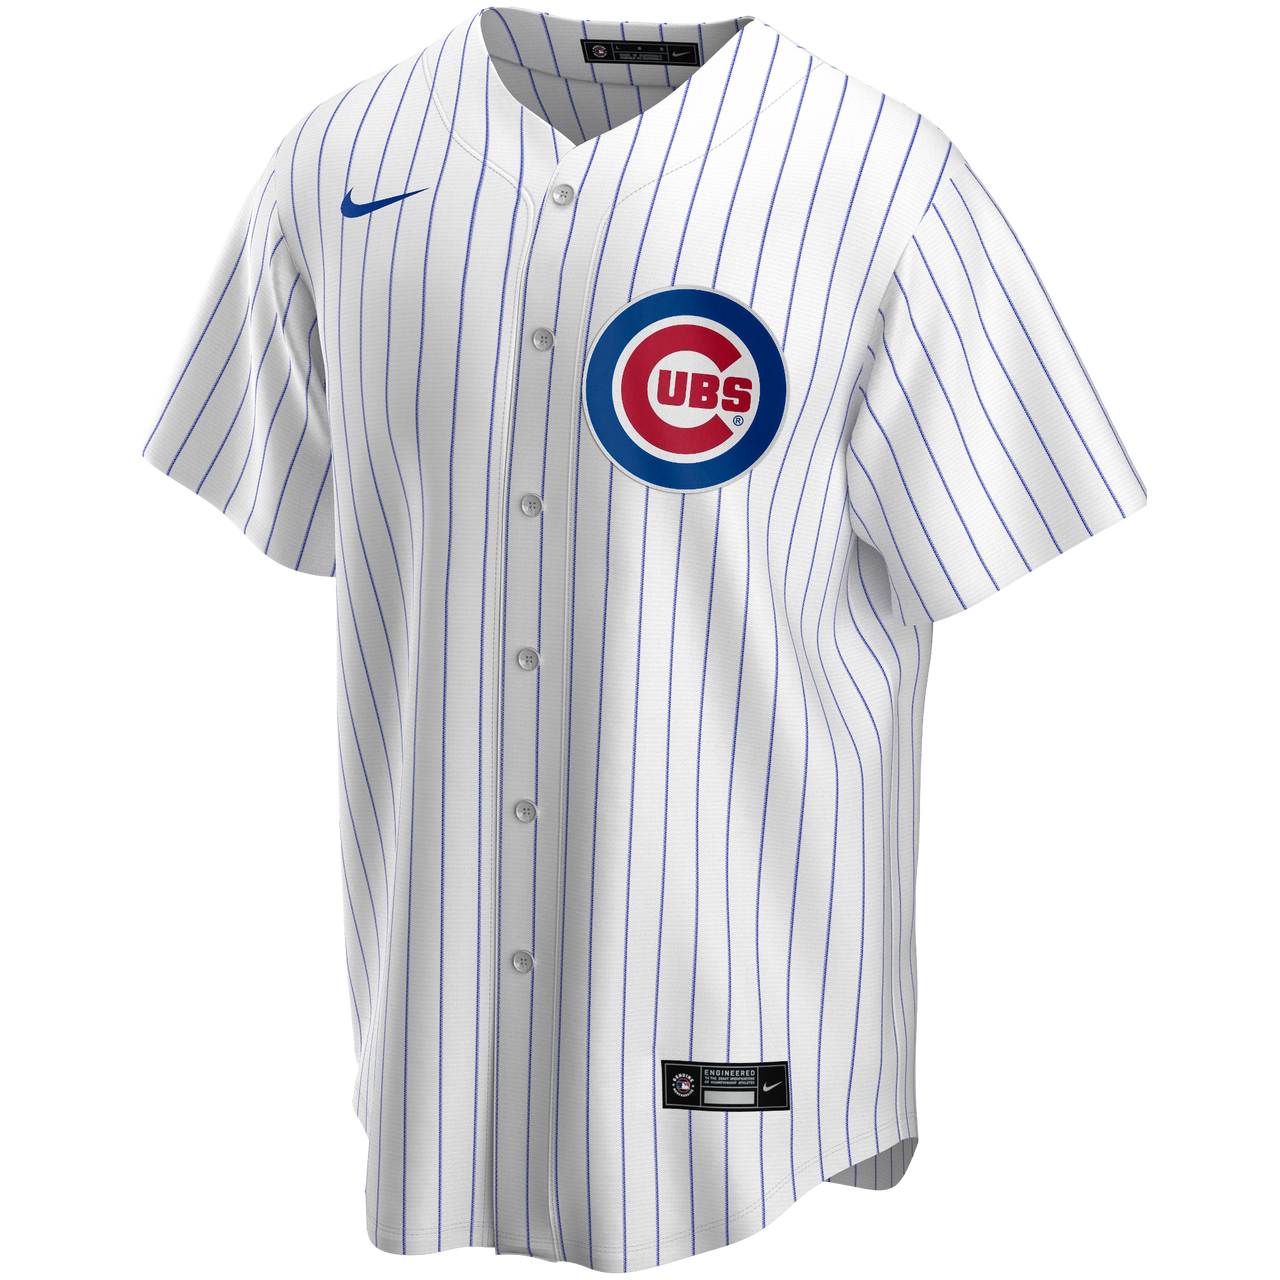 Sammy Sosa Chicago Cubs 1968 Cooperstown Jersey by NIKE